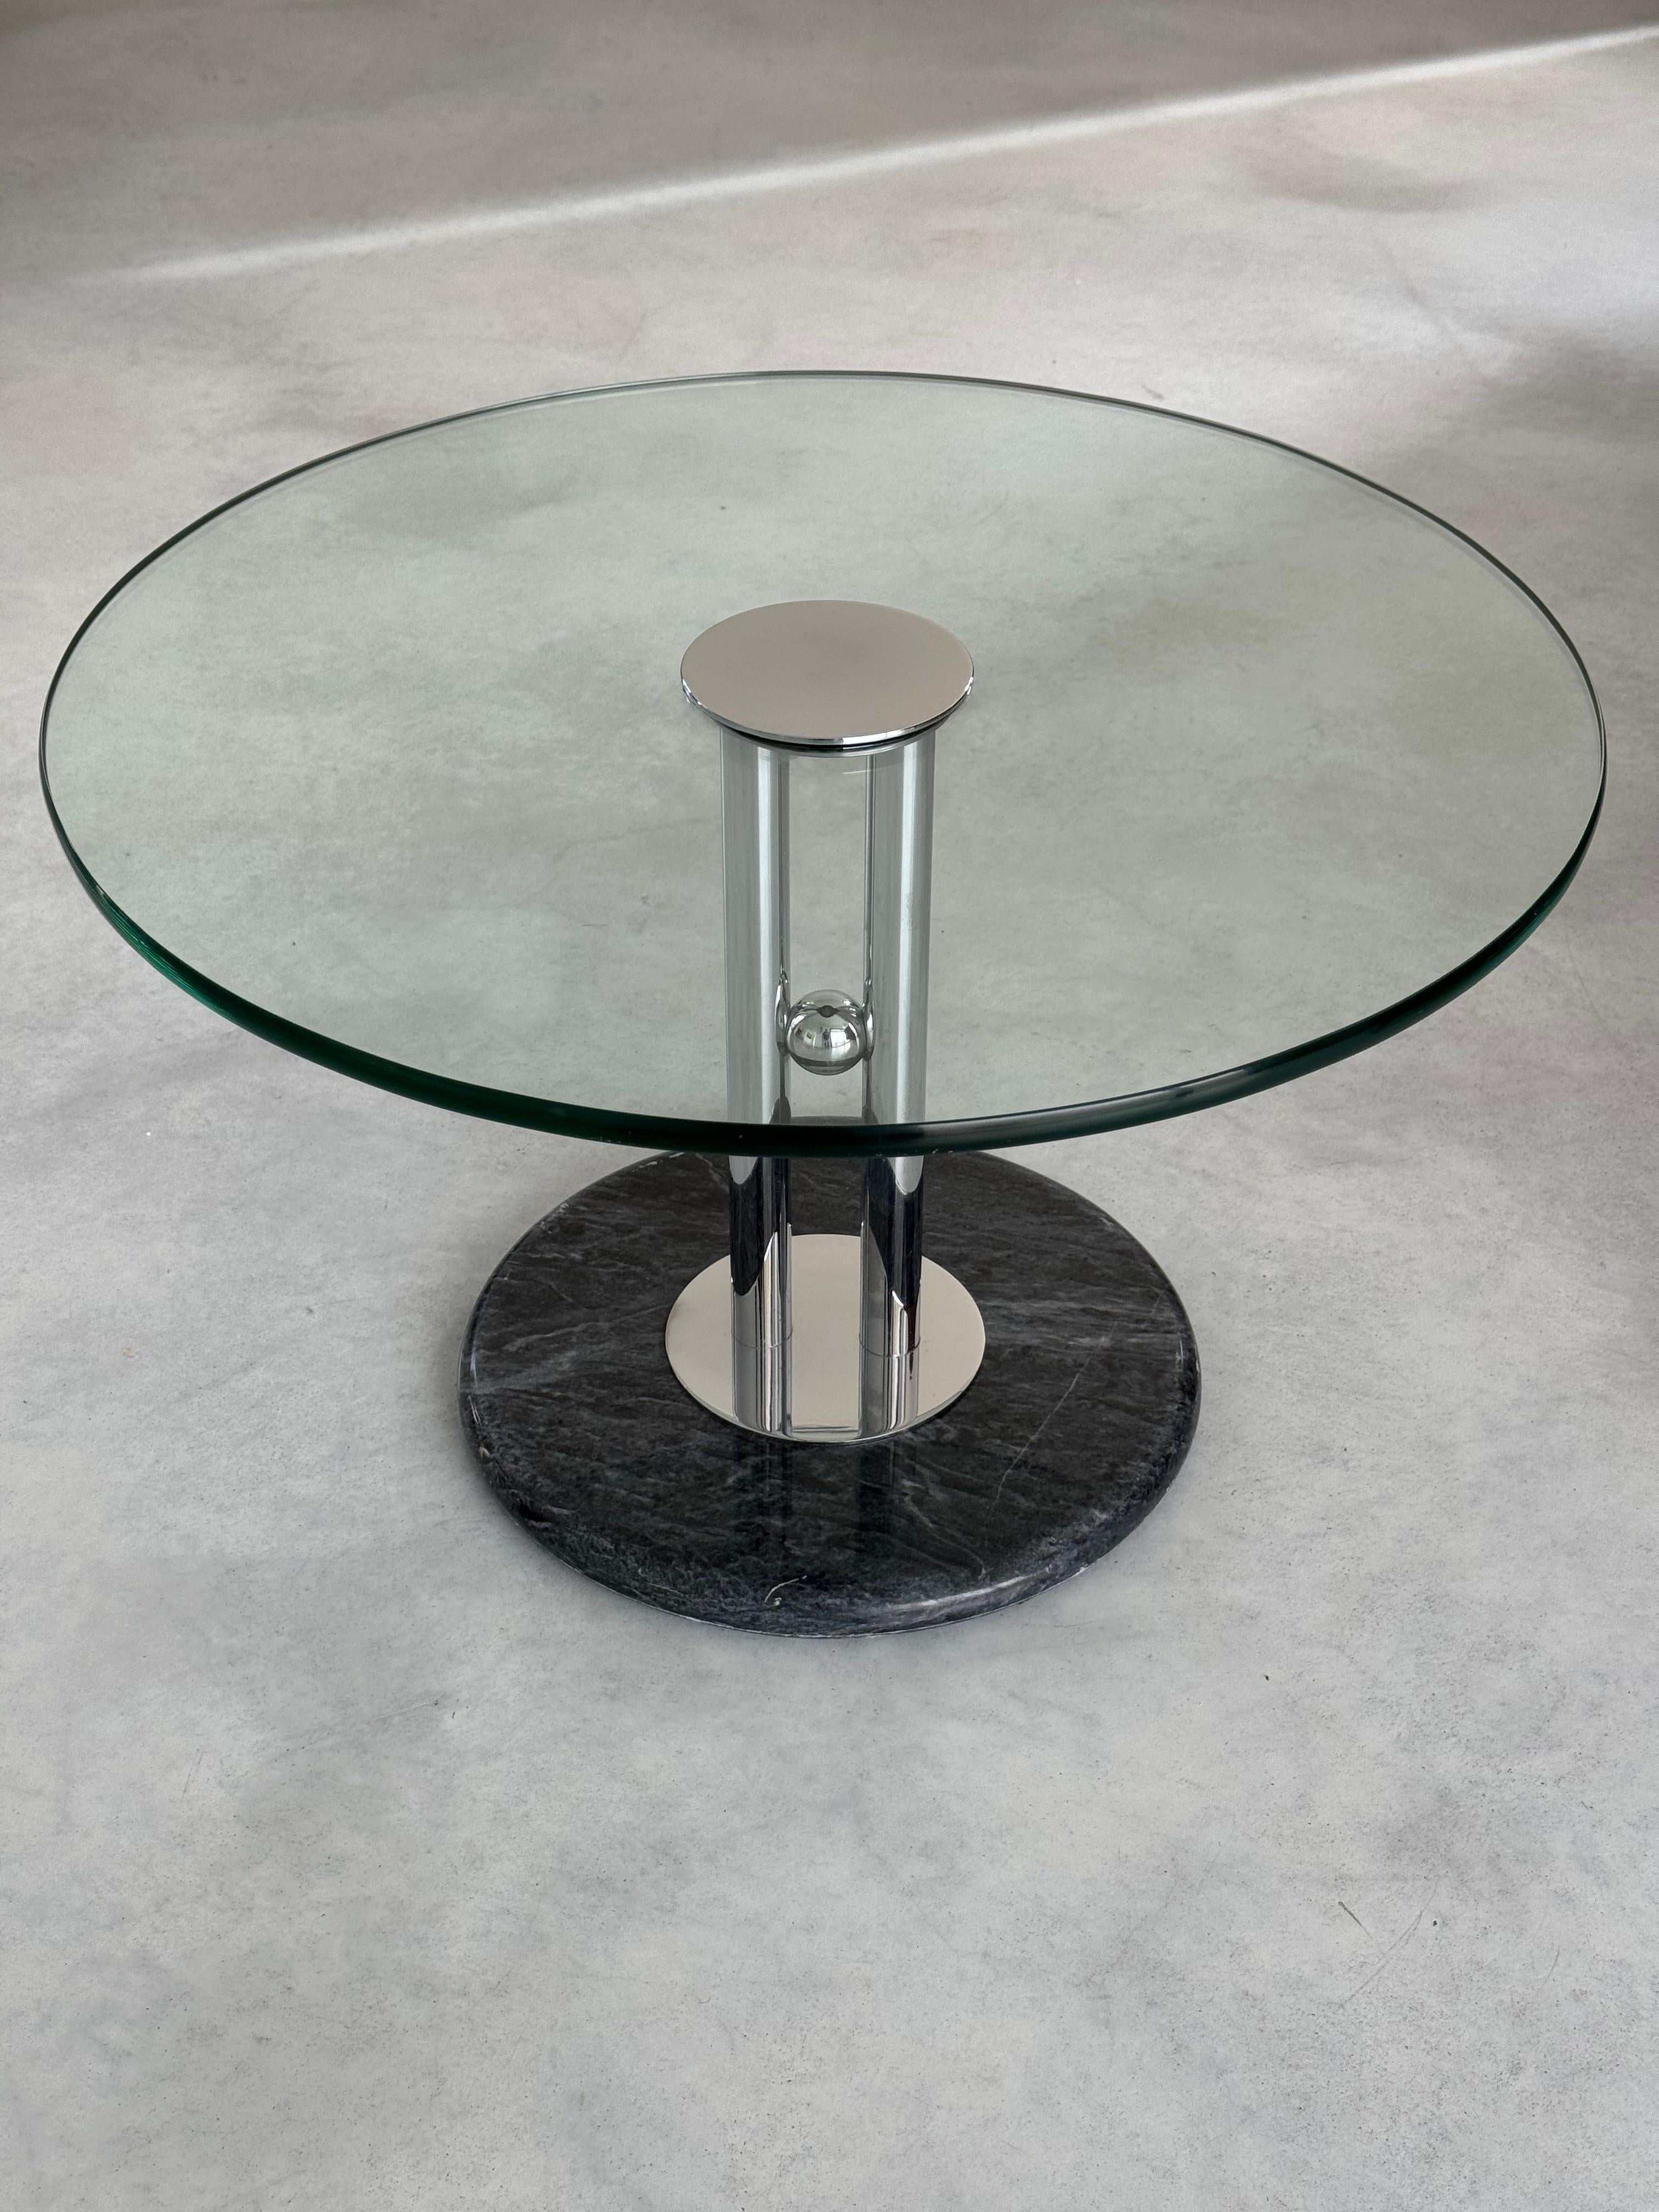 Post-Modern designer coffee table.
Marble base, chrome structure composed of two parallel cylinders and a sphere. Circular safety glass top (thickness 2.5 cm, diameter 65 cm).
The table is in good condition, traces of use and time spent.

Italian